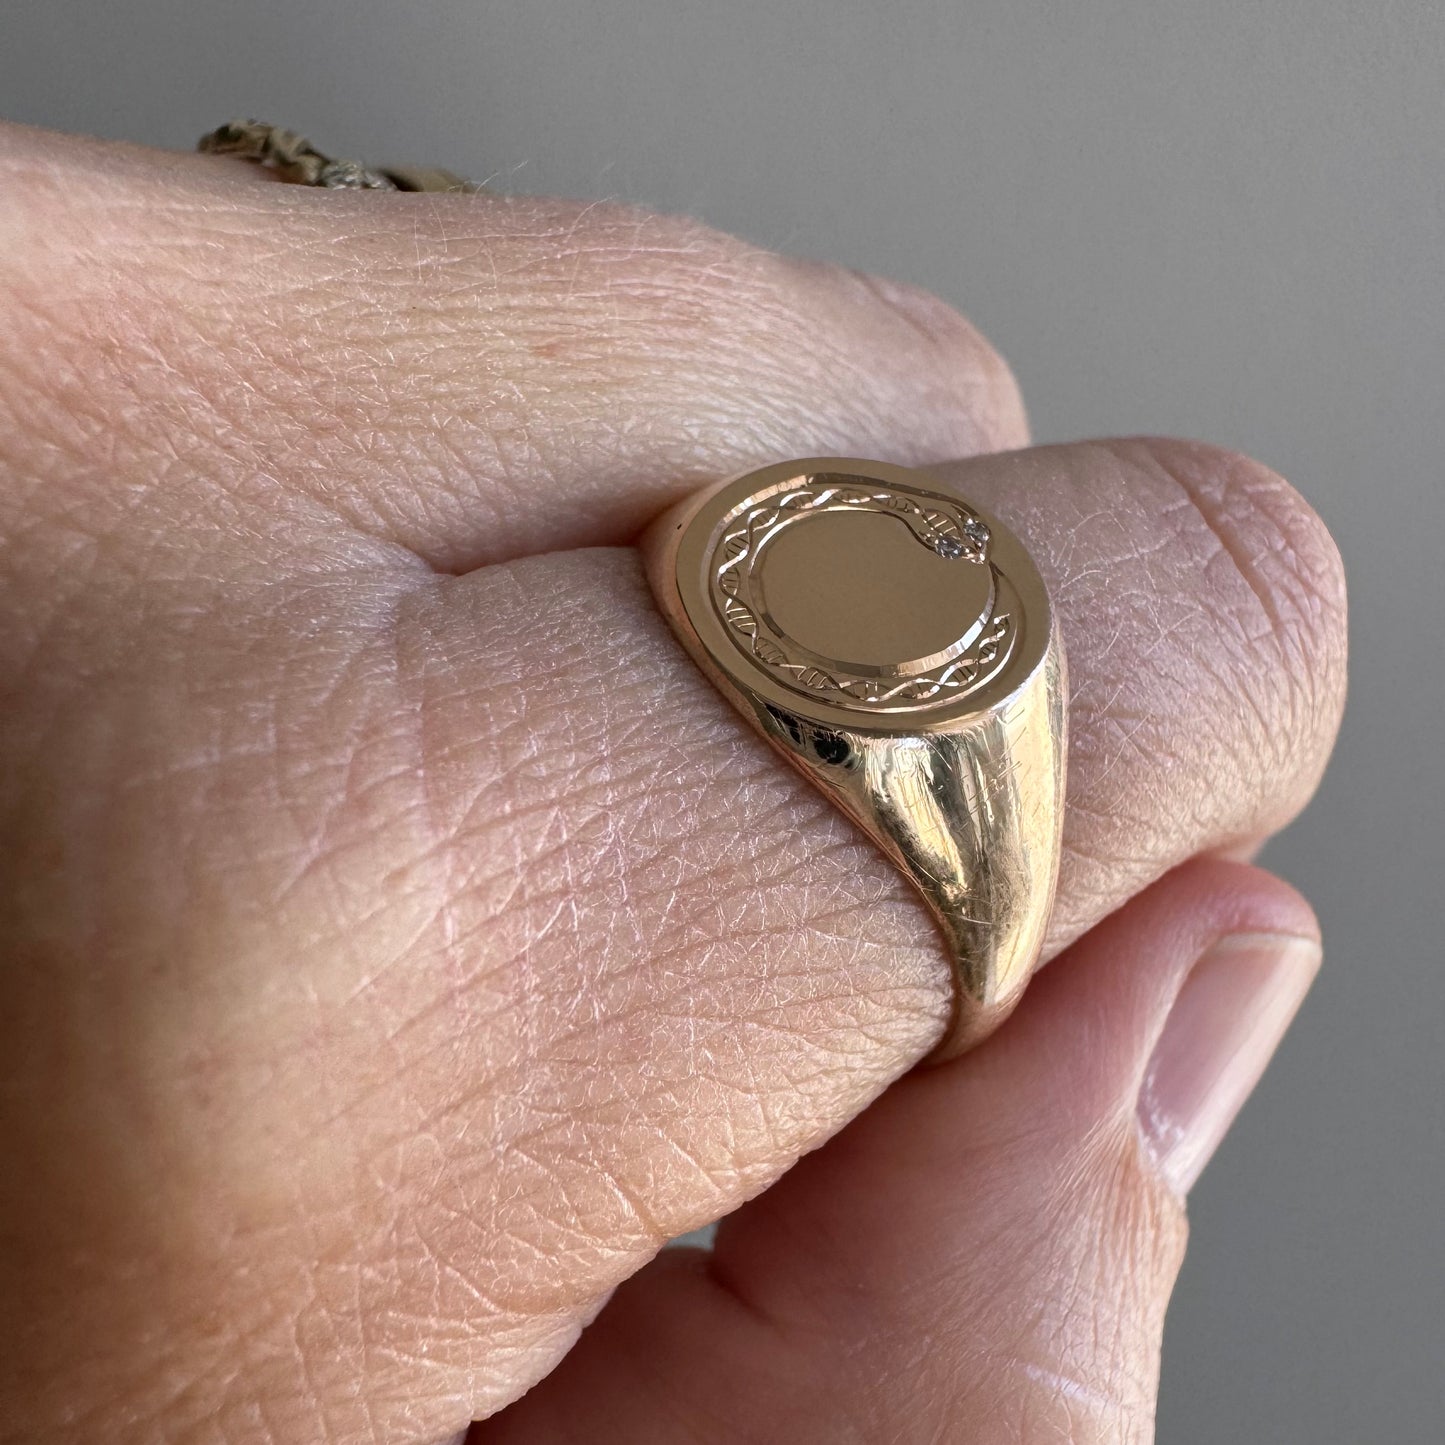 reimagined A N T I Q U E // ouroboros cycle / 10k rosy gold round signet with engraved snake and diamonds / size 9.25 to 9.5